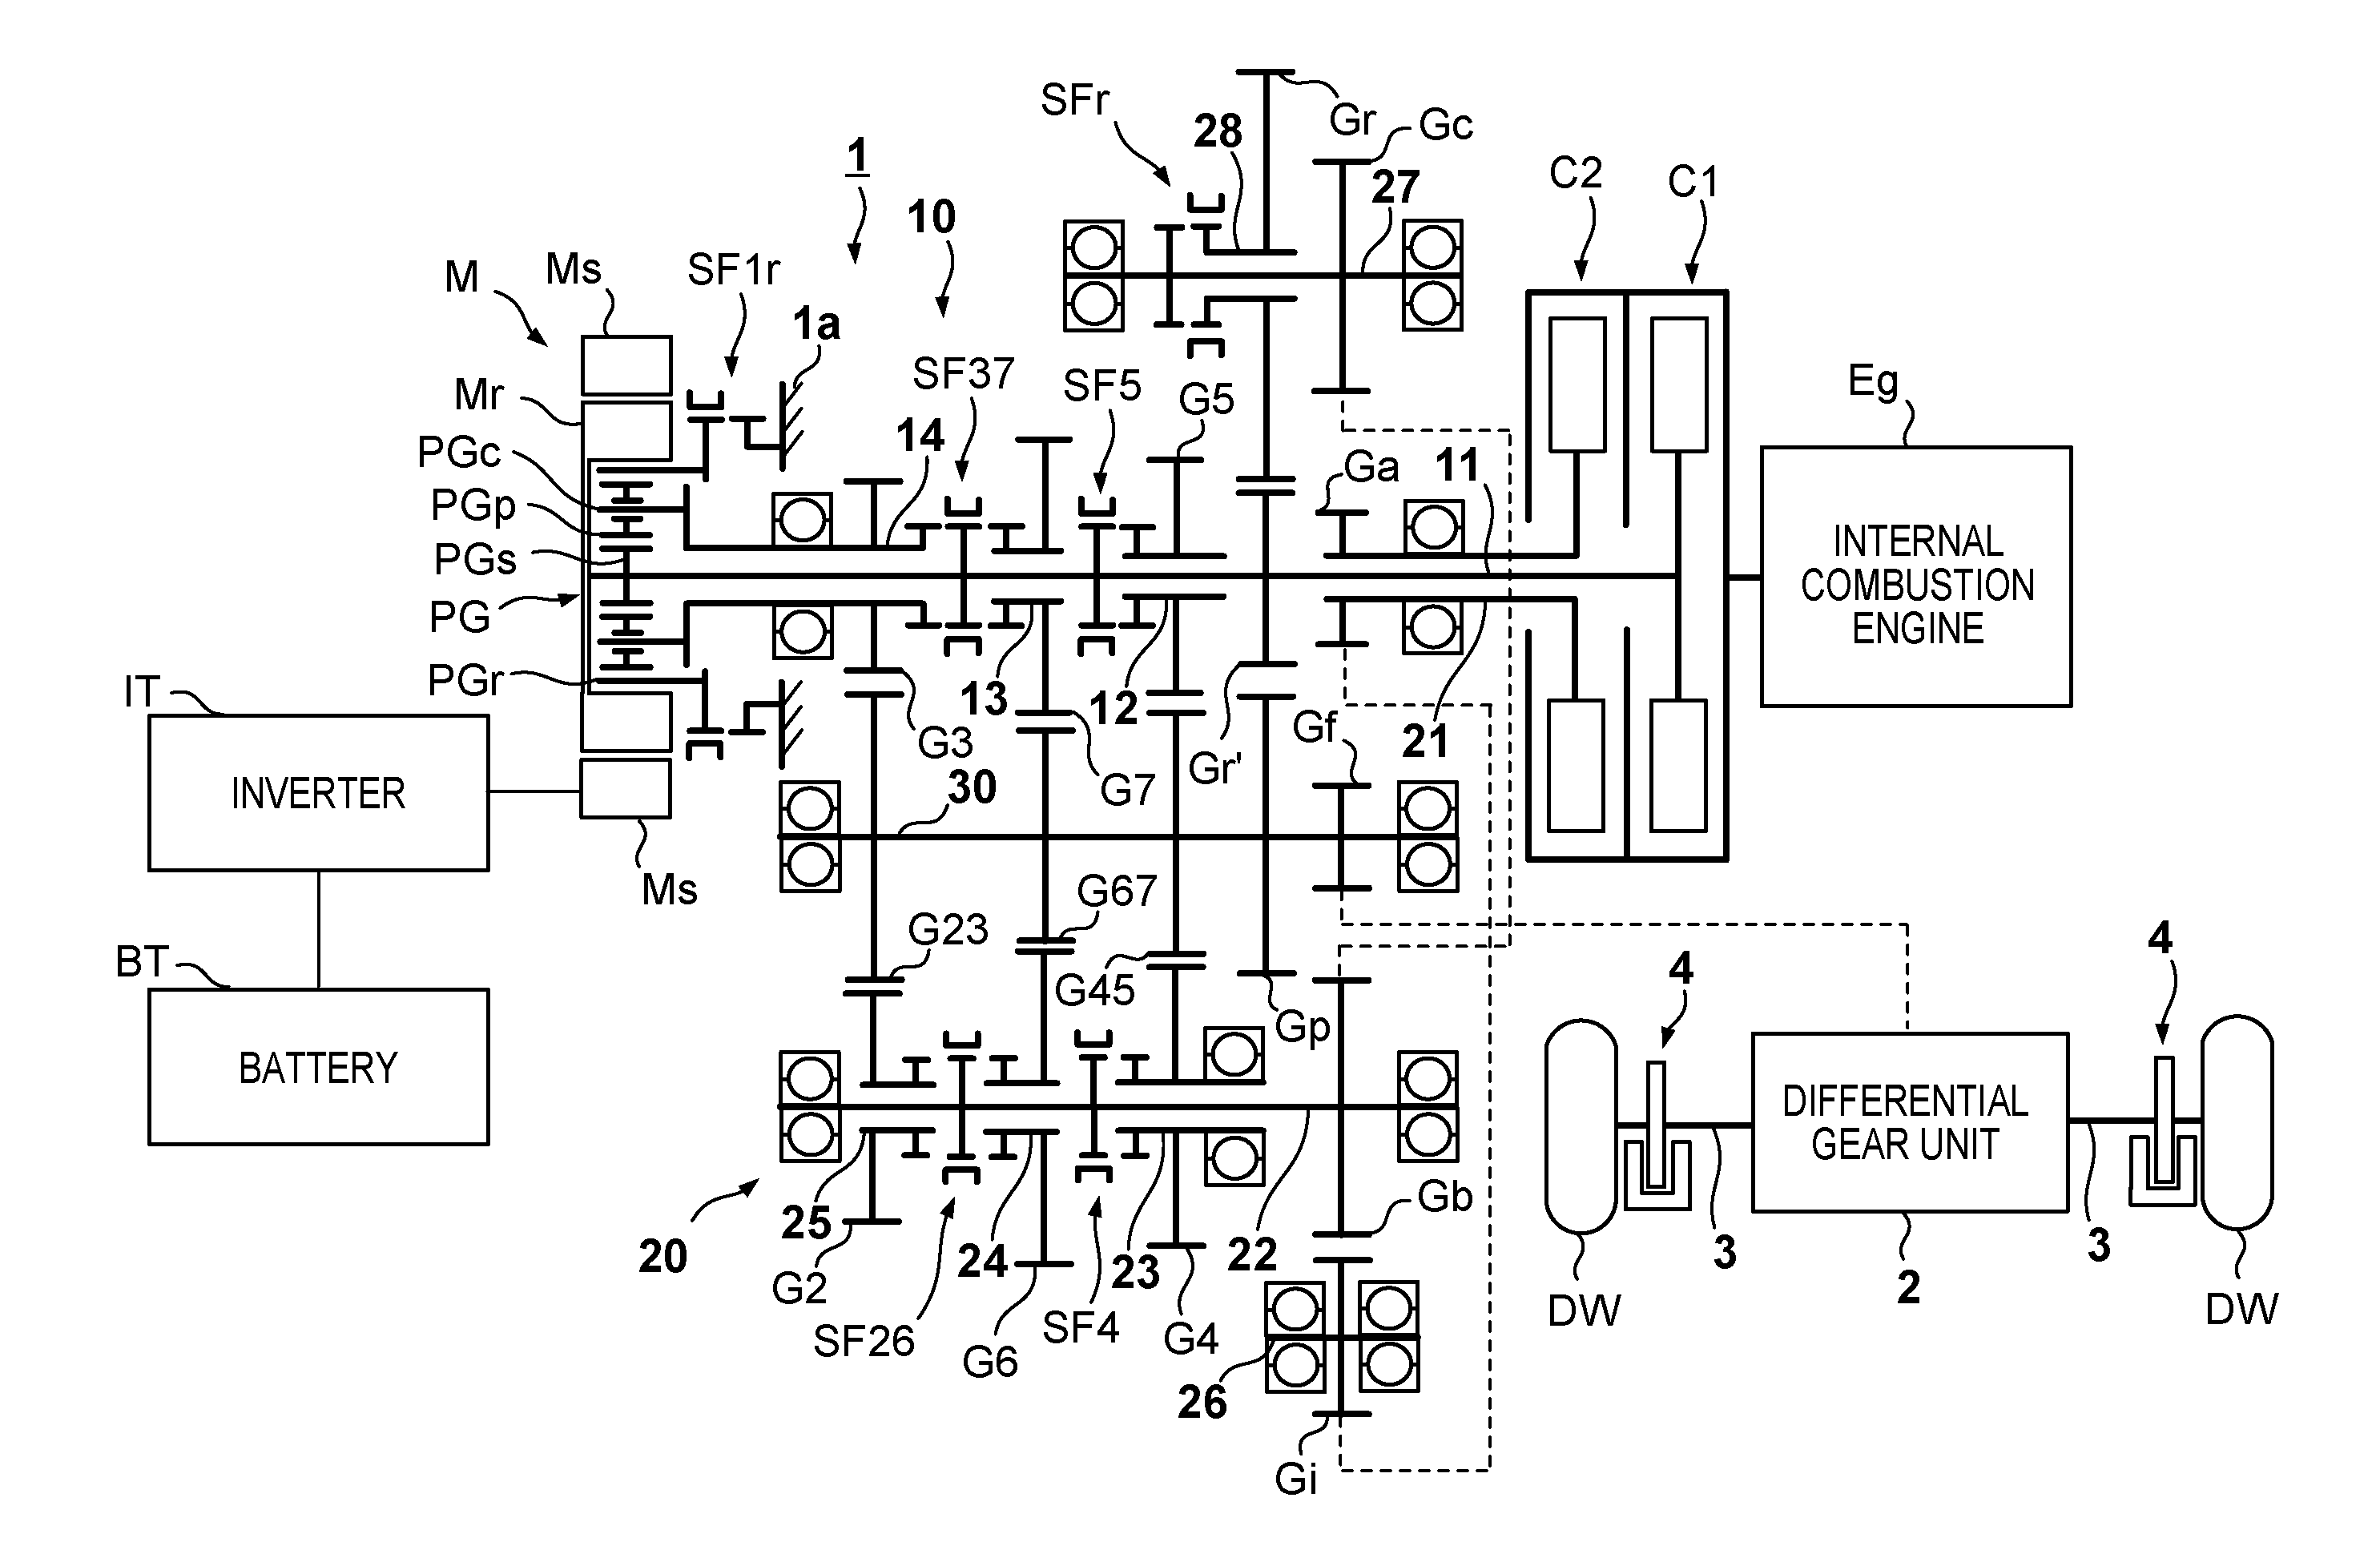 Transmission control for a hybrid electric vehicle with regenerative braking